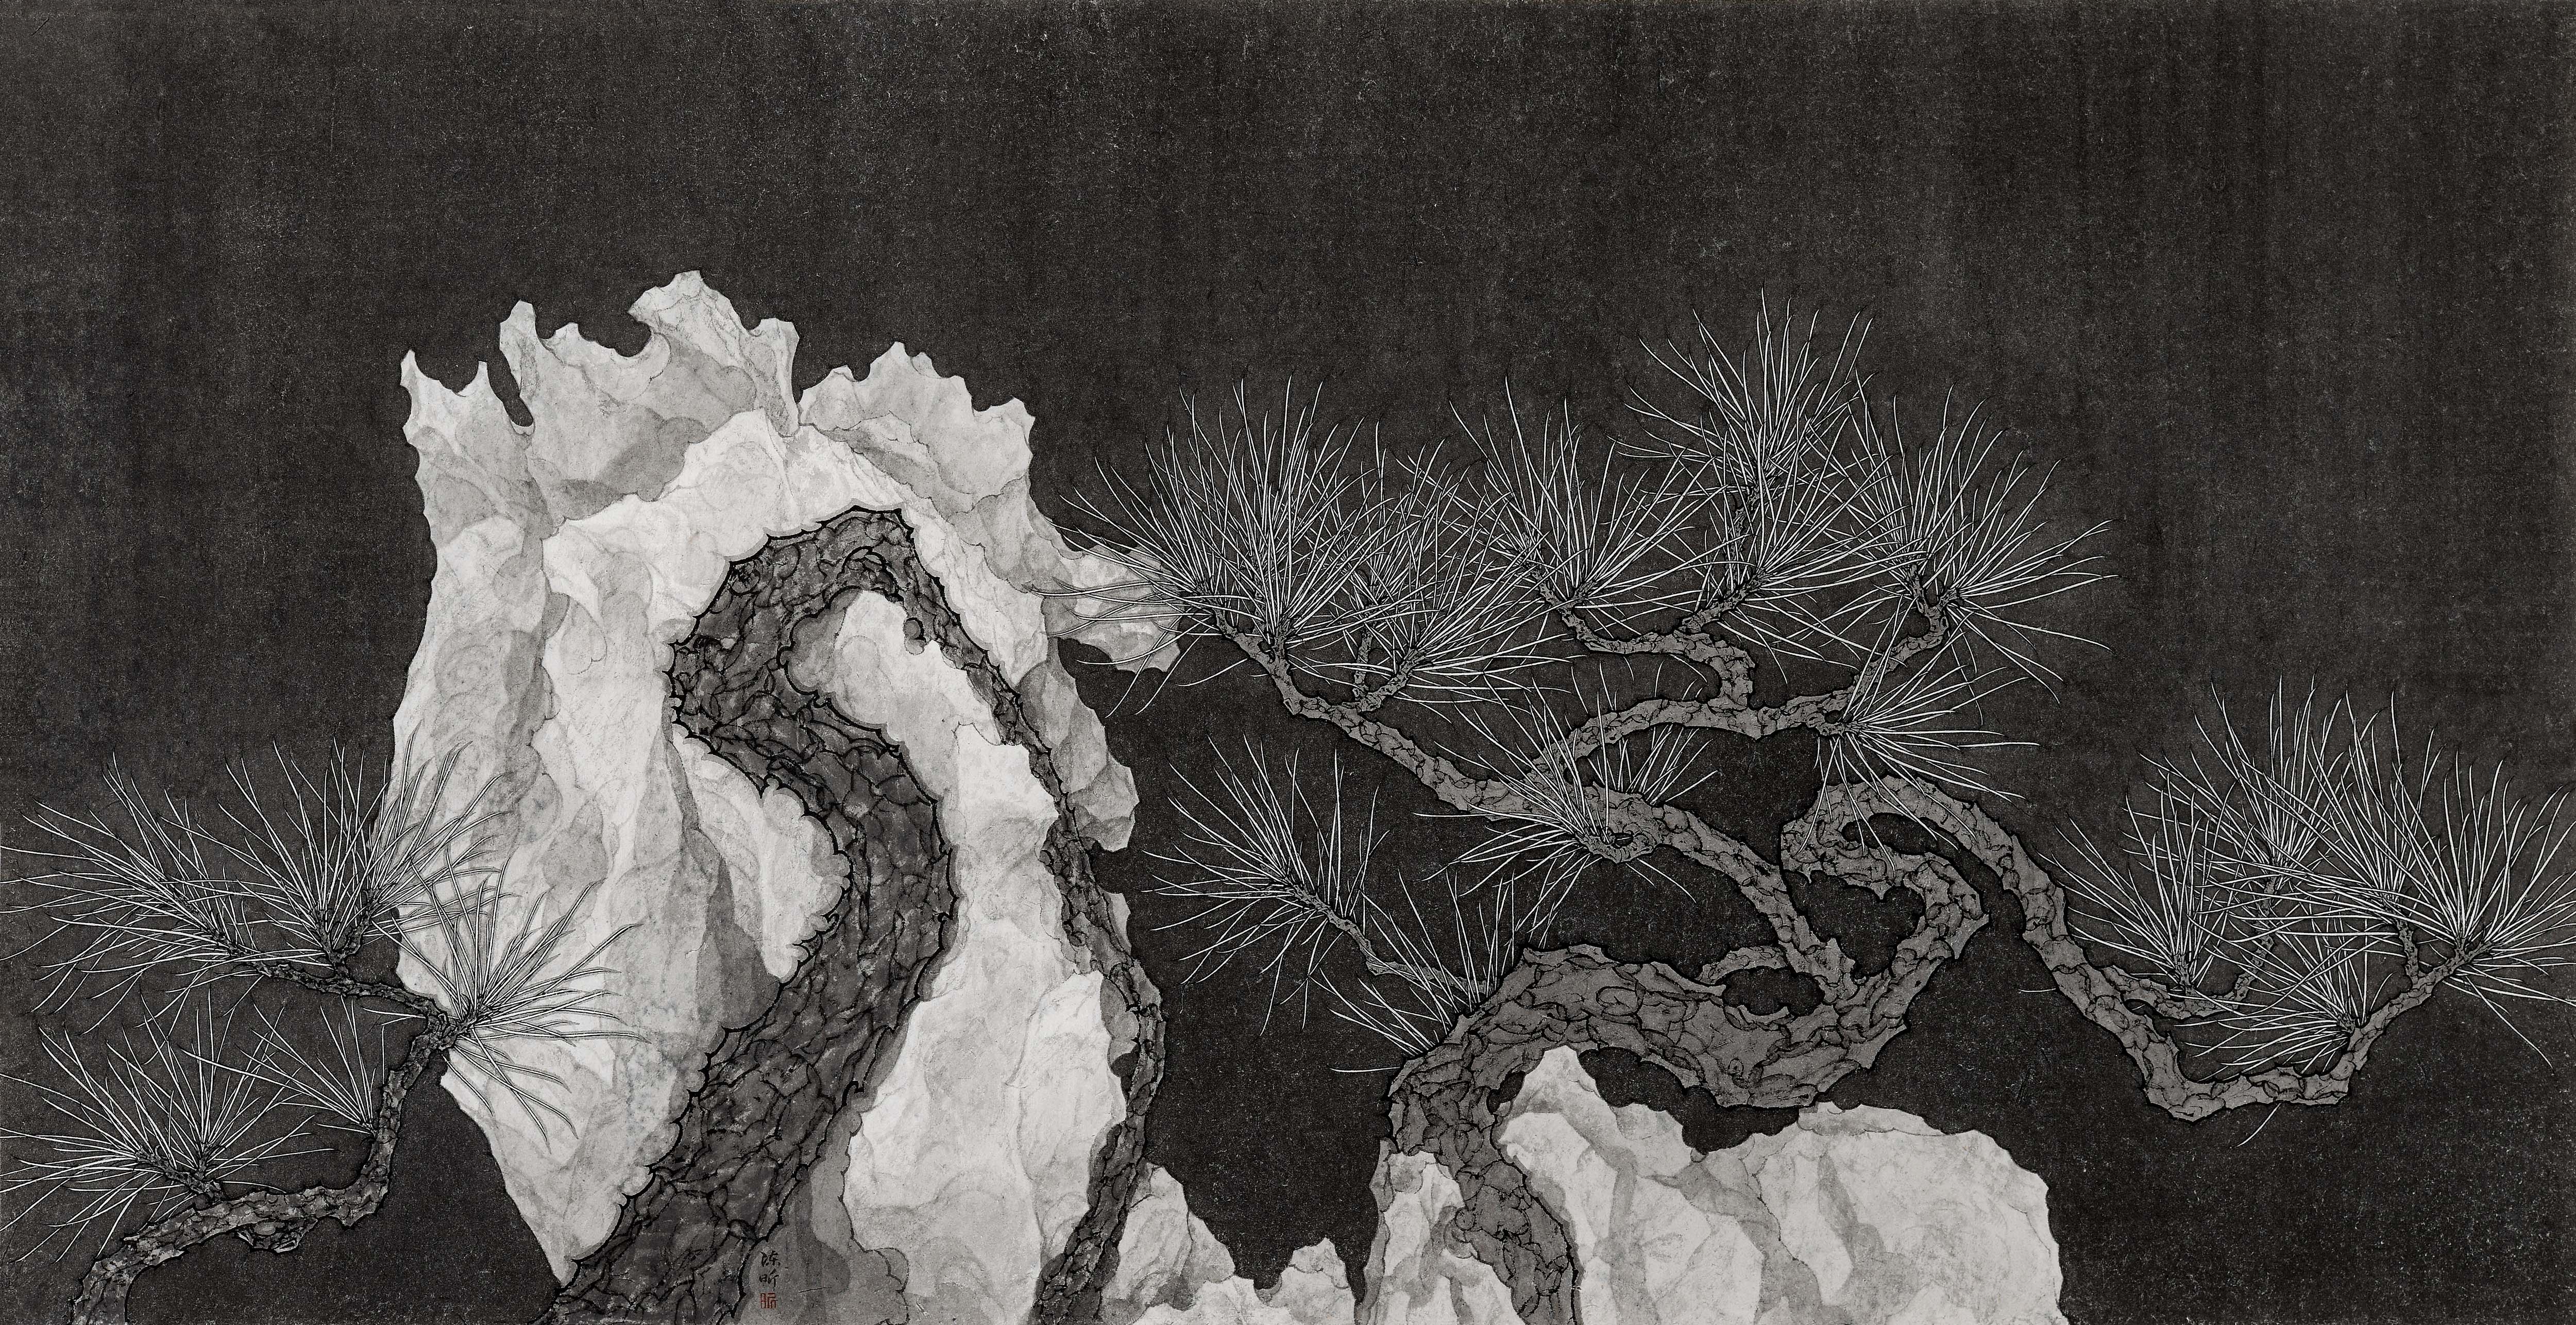 Twisted Branches of an Old Tree, Chen Xin 《盆中景之虬枝》陈昕